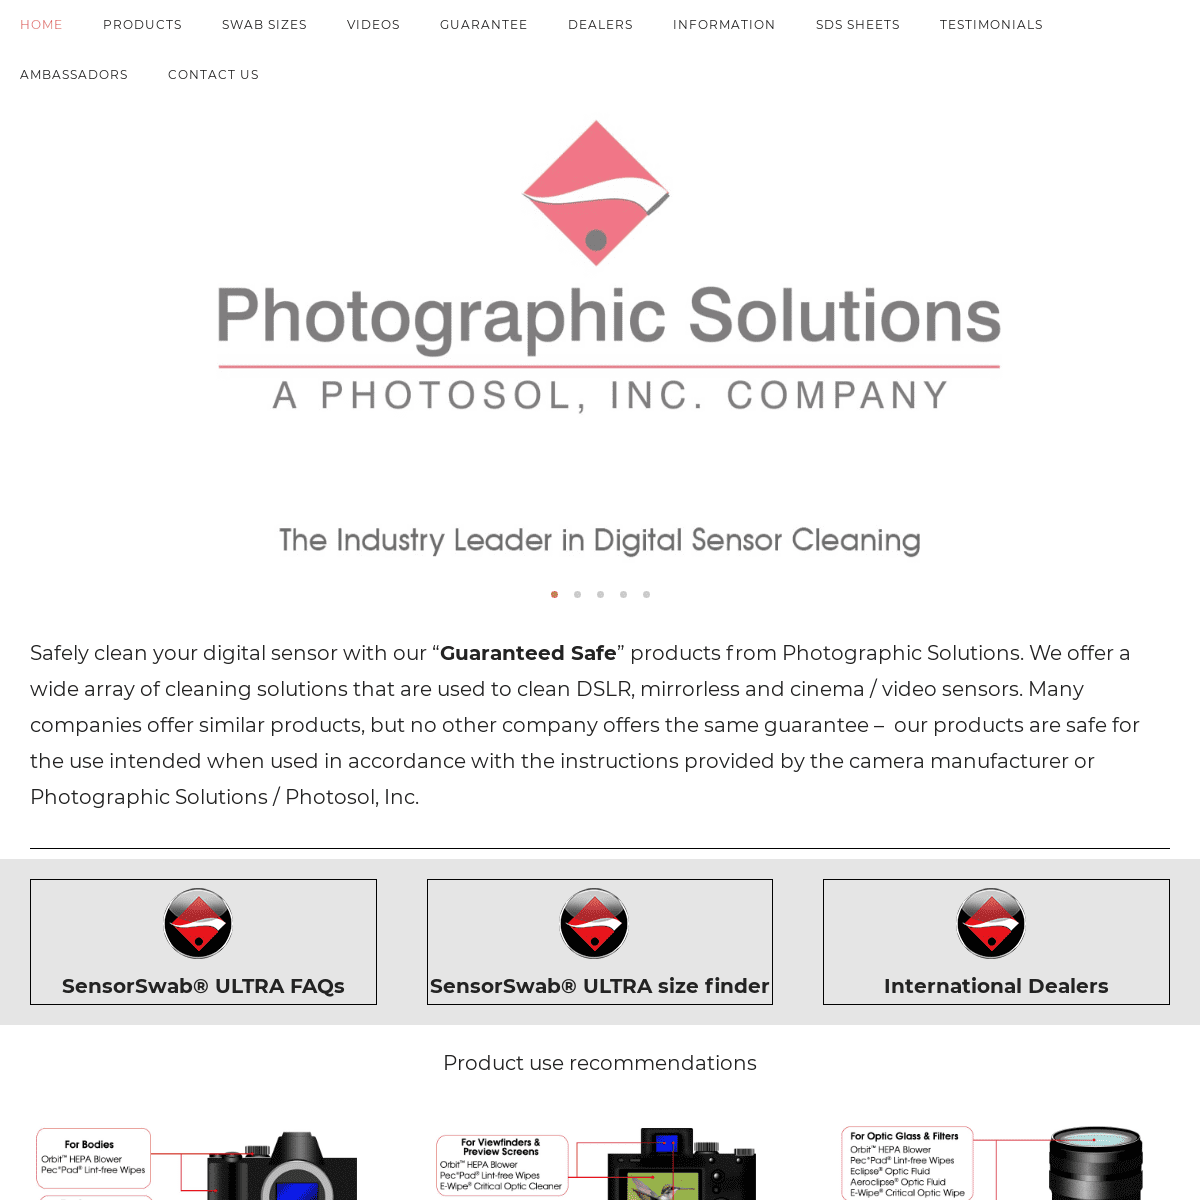 A complete backup of https://photosol.com